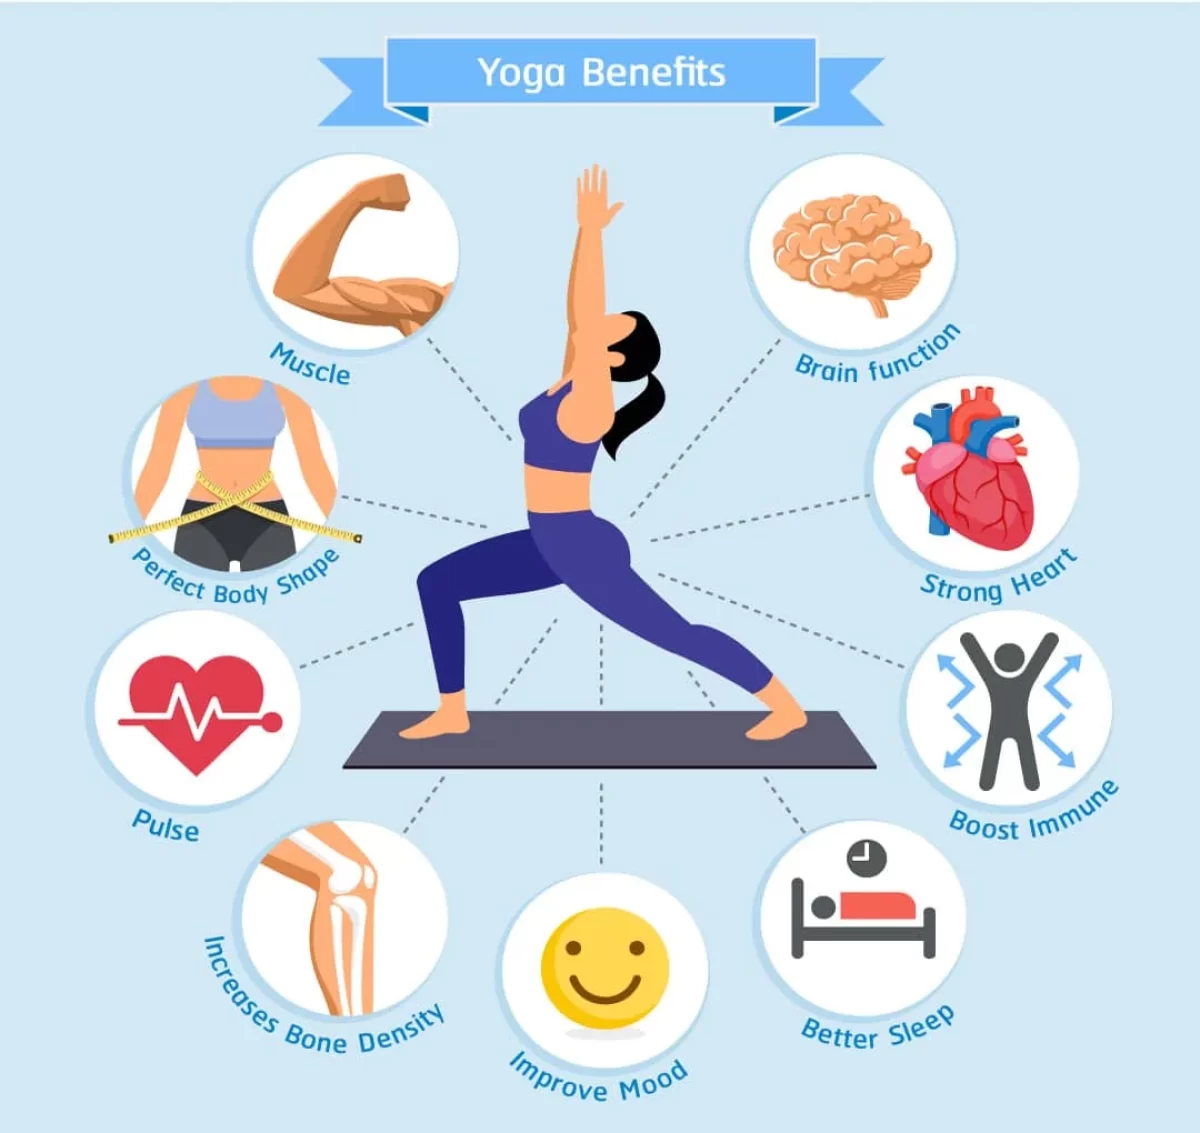 Yoga: Modern research shows a variety of benefits to both body and